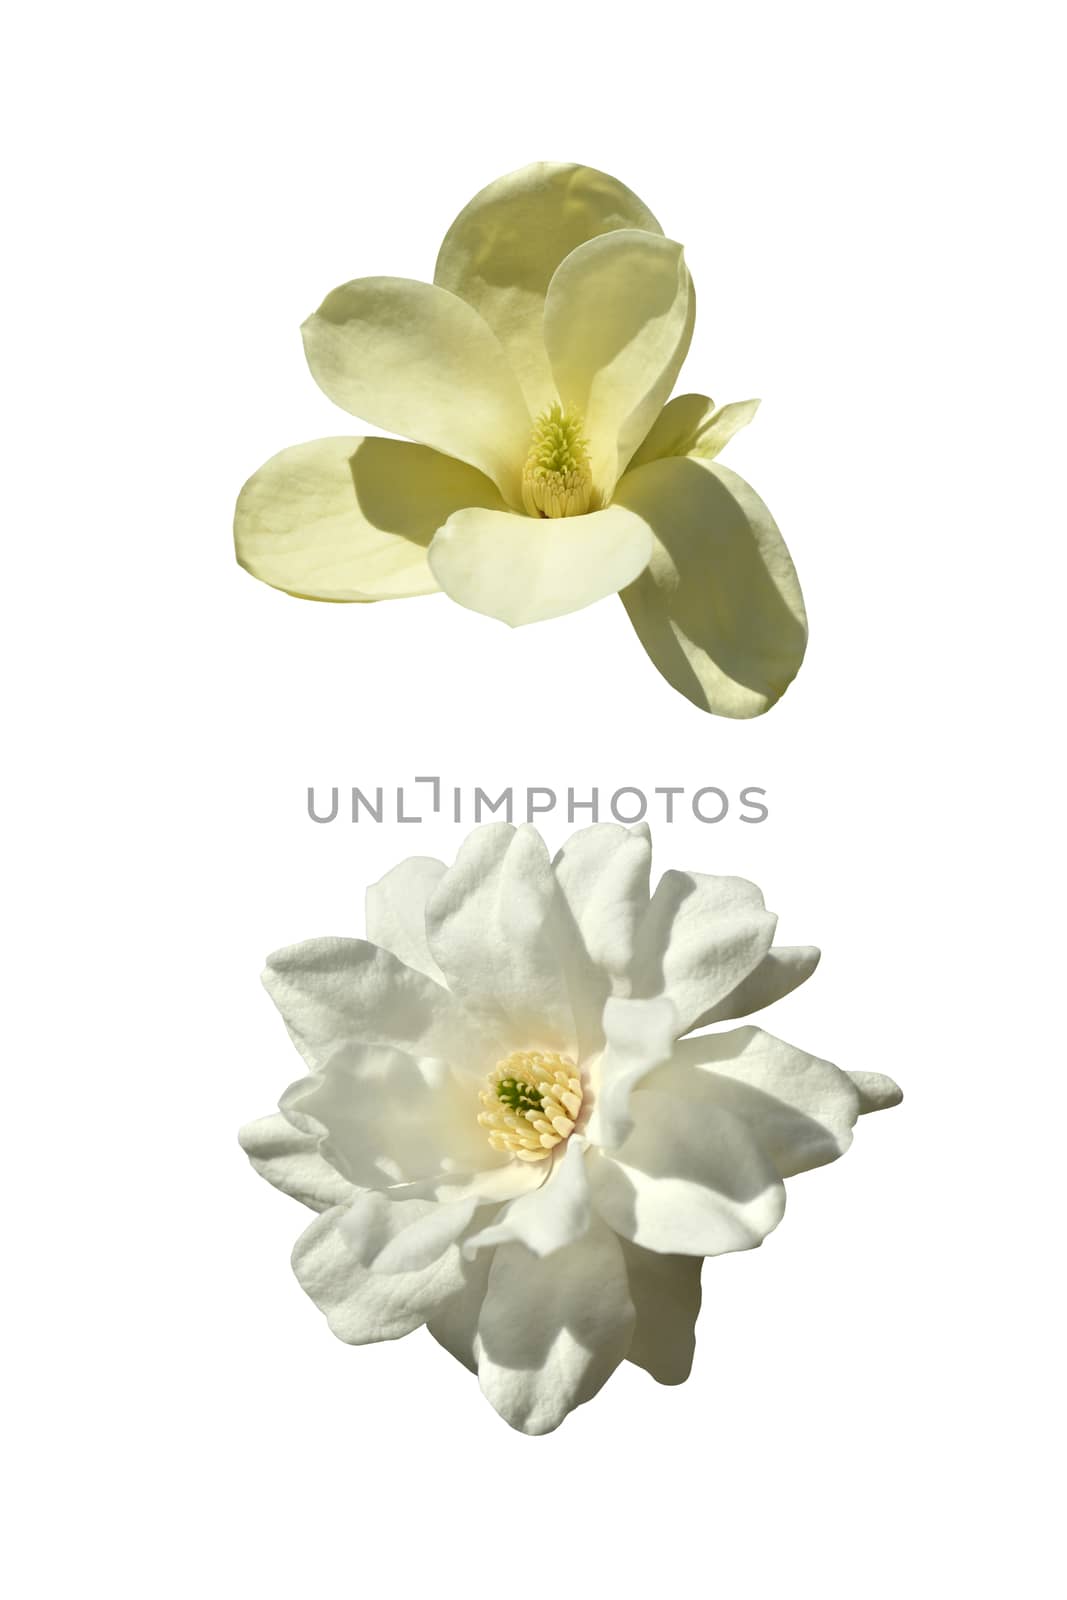 Two Magnolia isolated on withe by Hbak